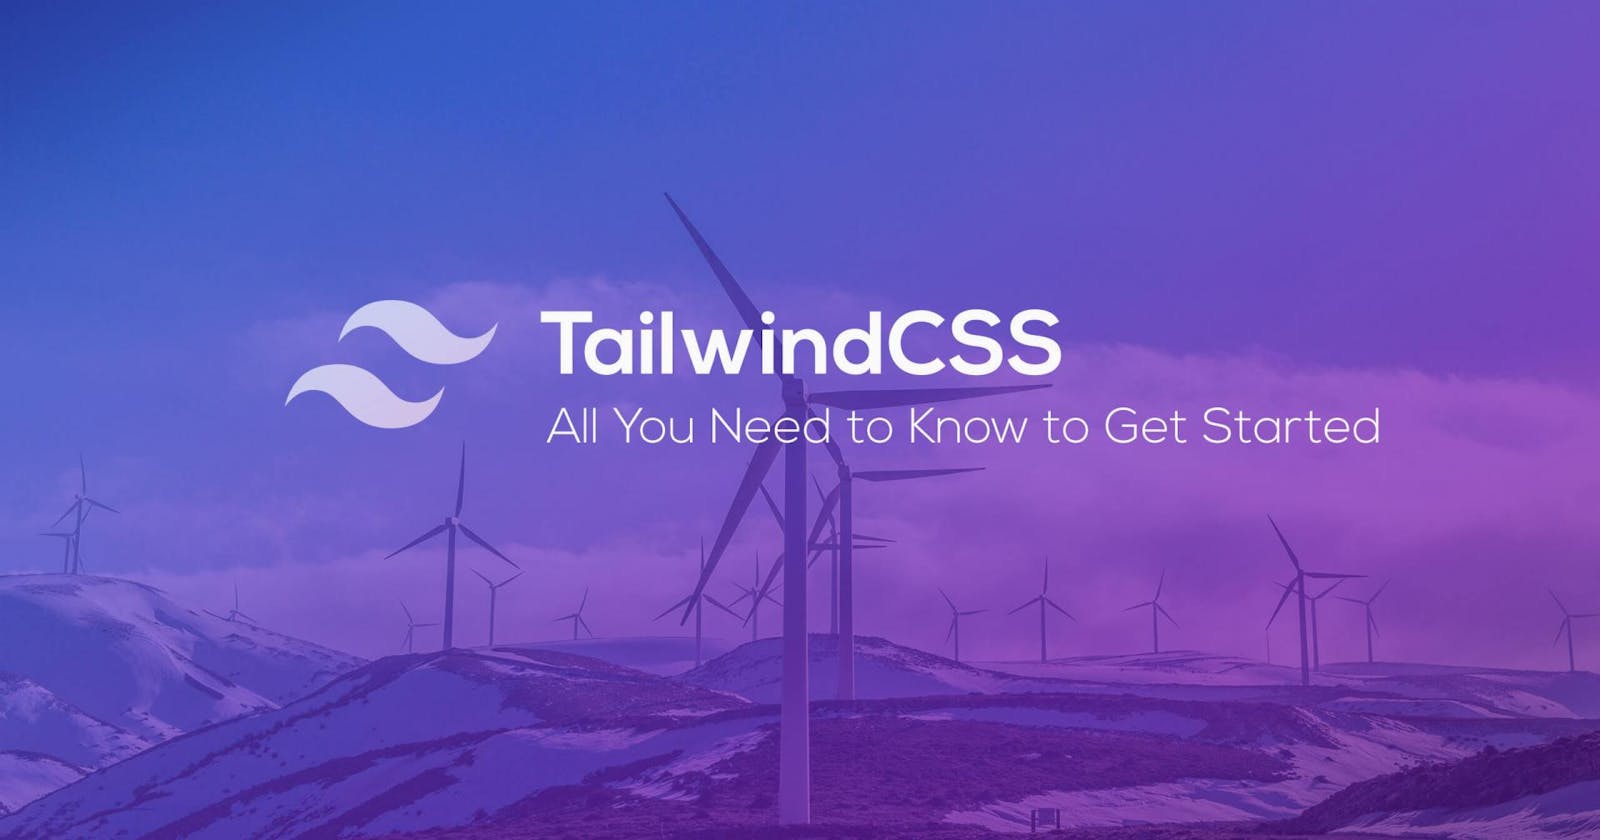 Introduction to TailwindCSS